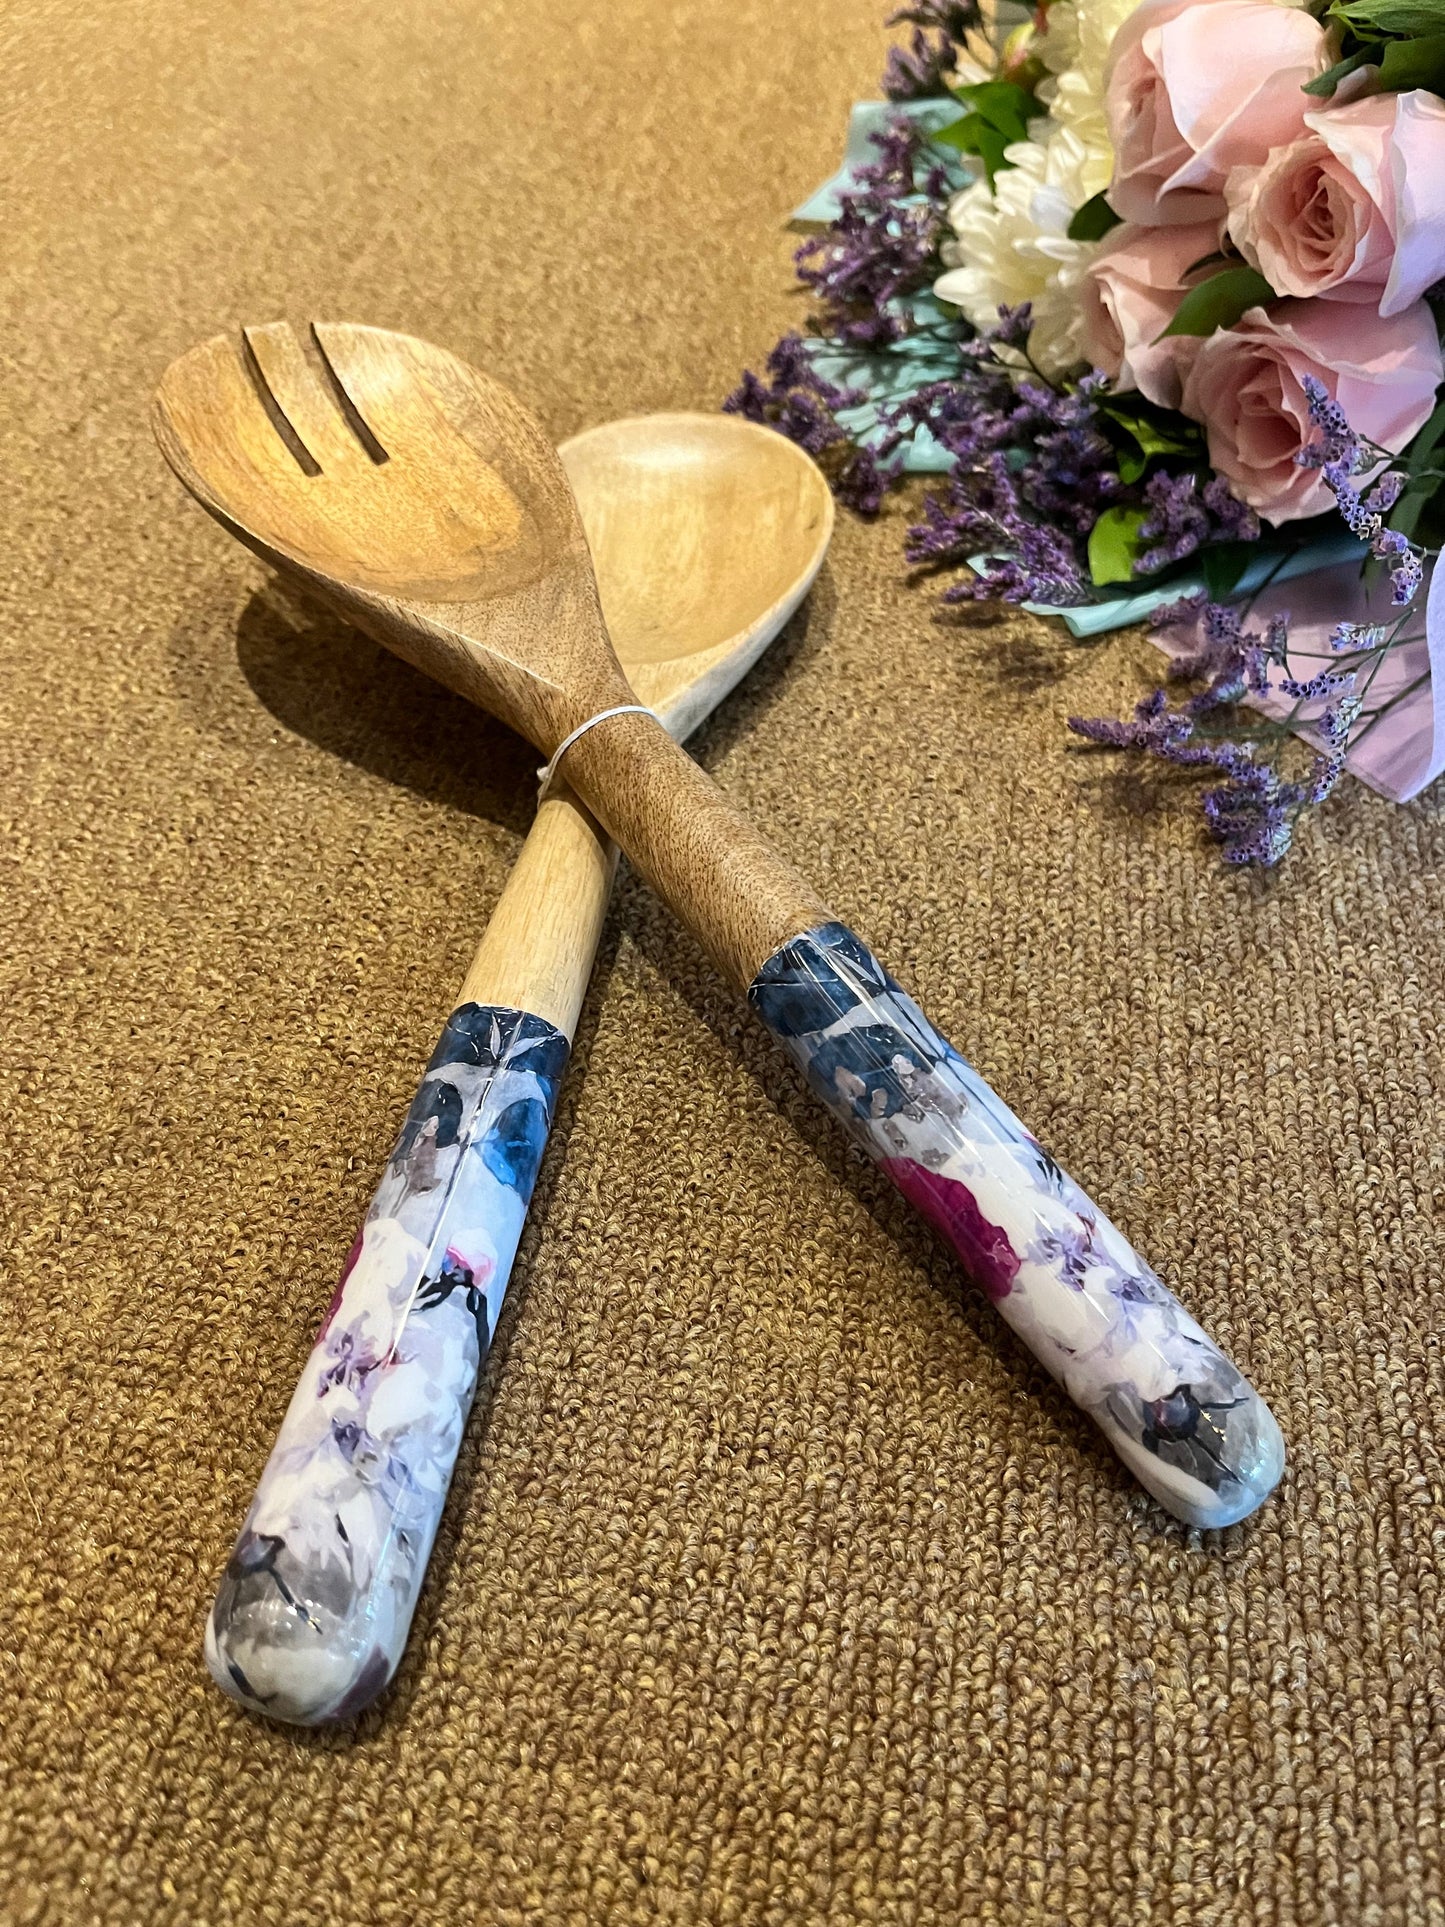 Winter Blossom - Large Spoon for Corporate Gifts